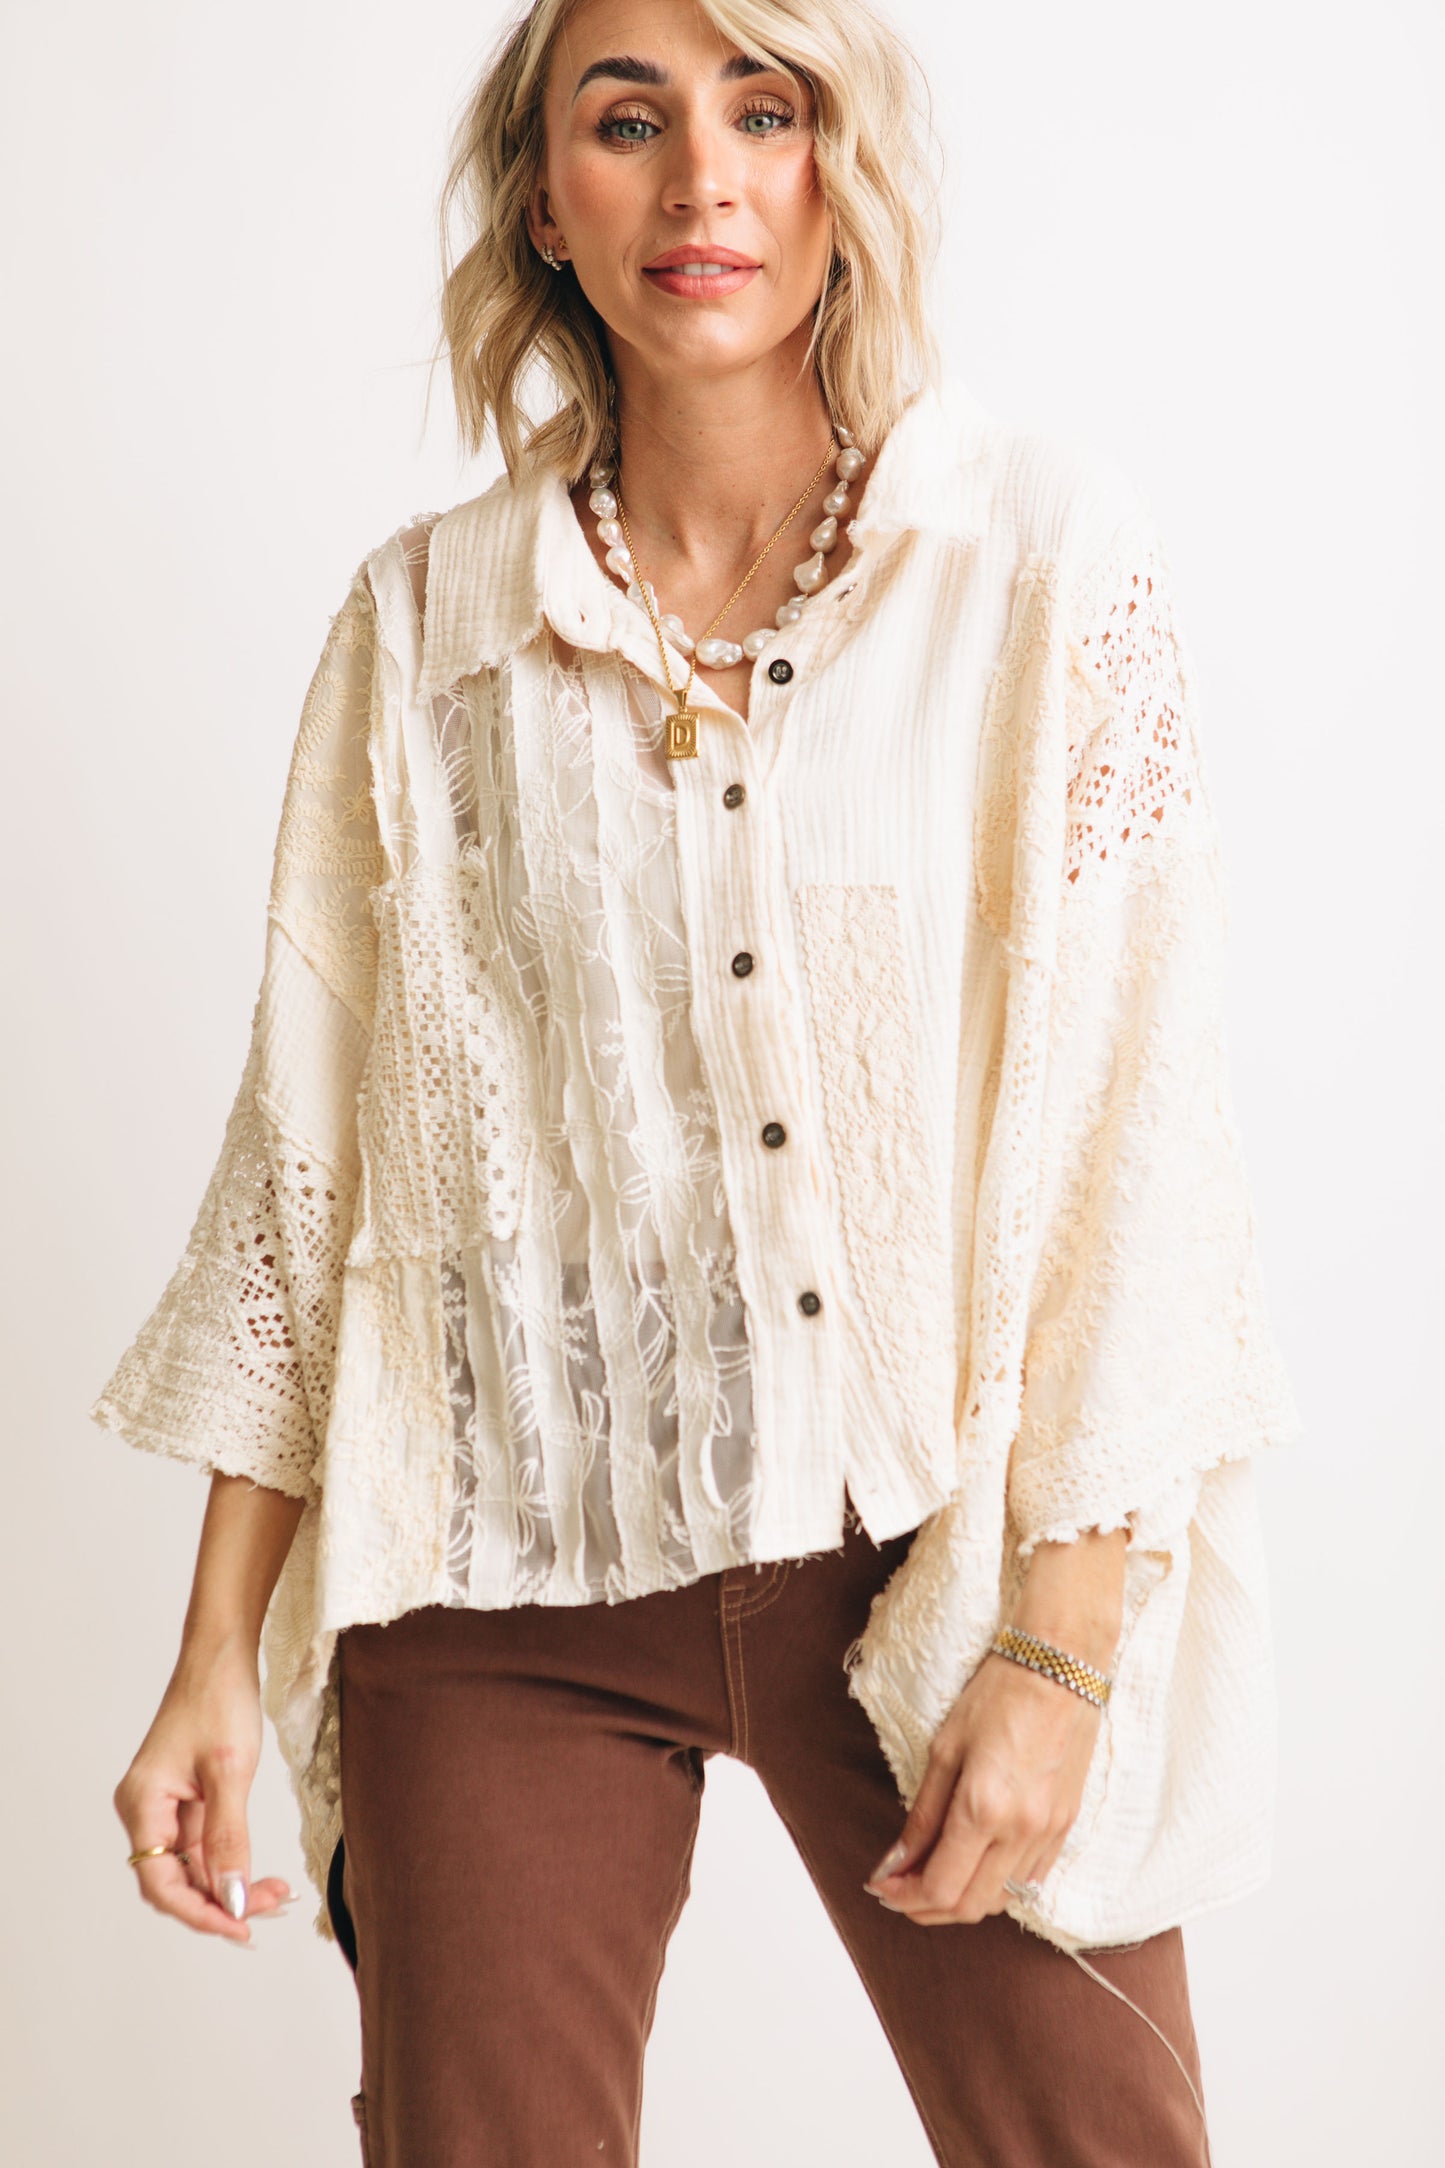 Pol - Ivory Lattice Embroidered Button Down Shirt (S-L)